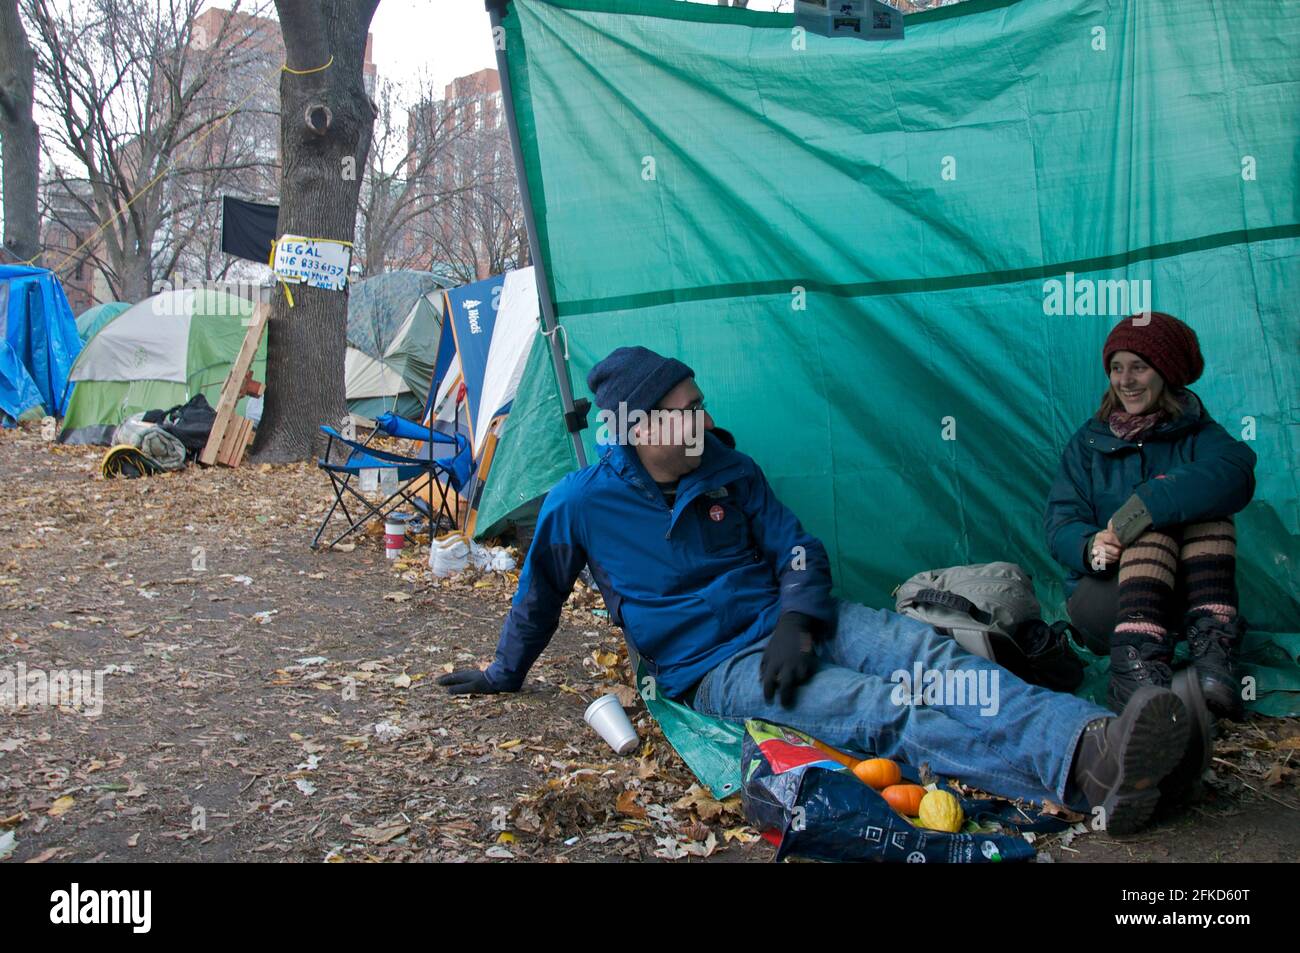 Toronto, Ontario, Canada - 20th November 2011: People living in a tent in Occupy Toronto Stock Photo